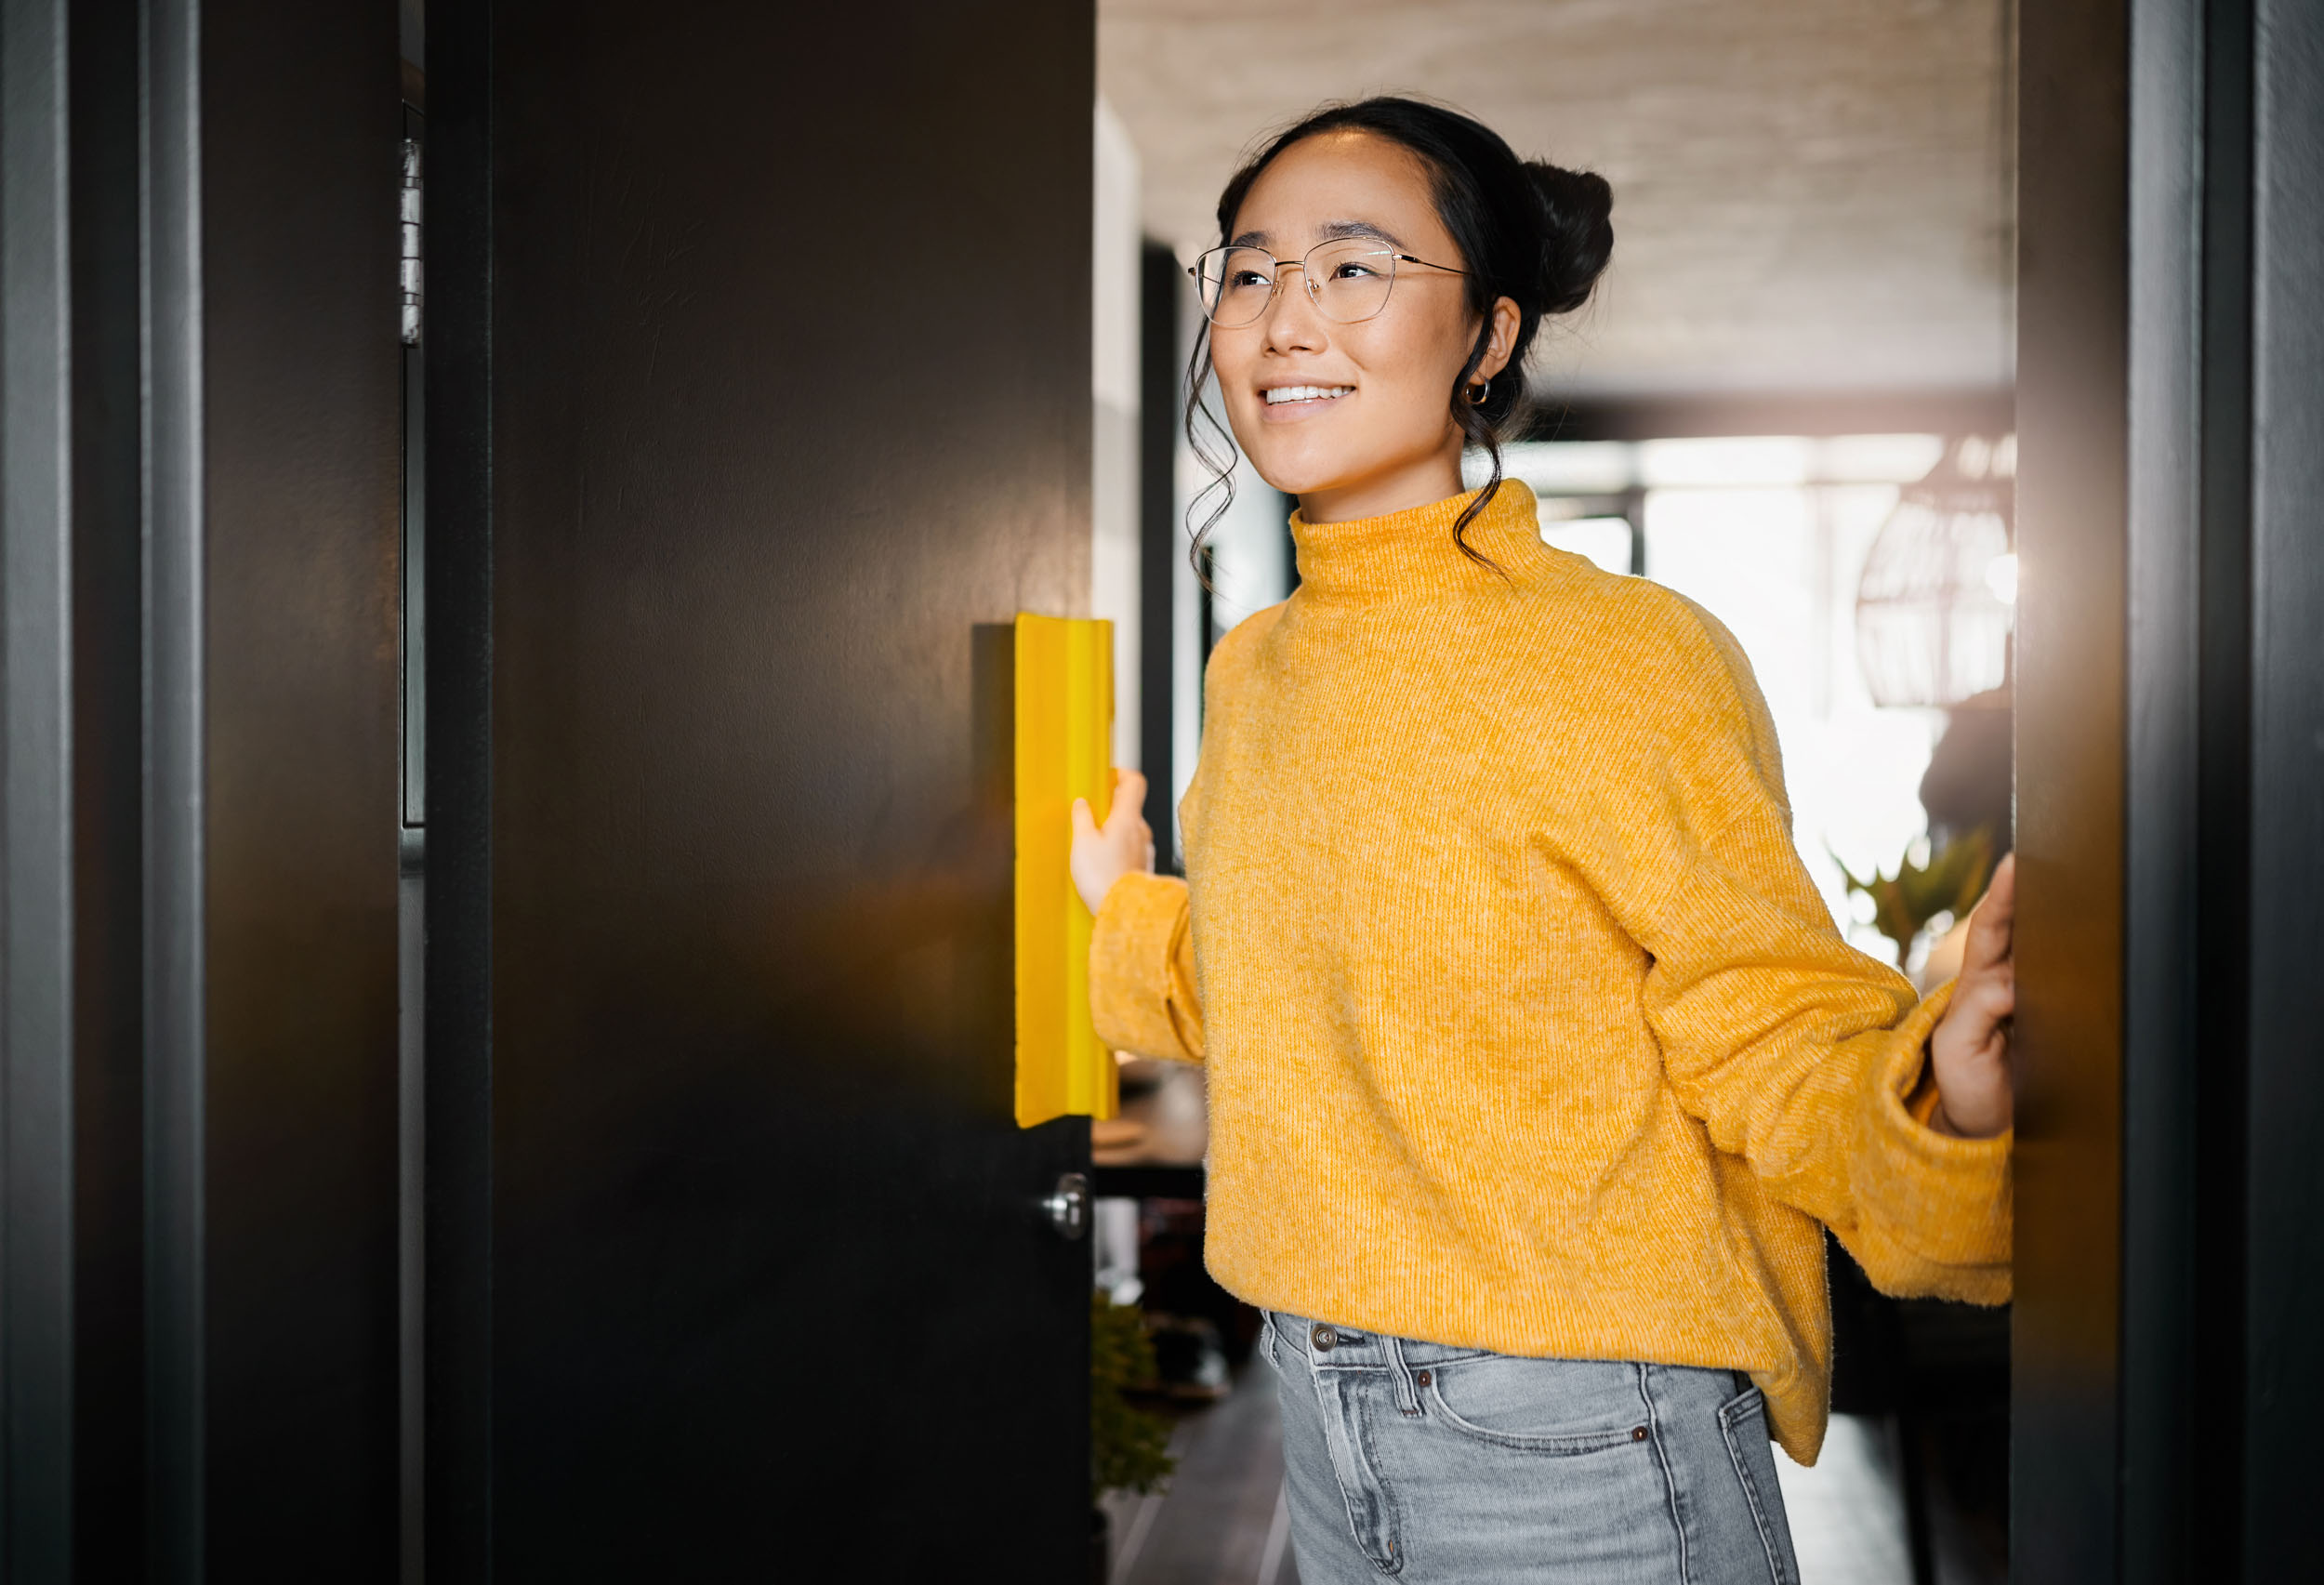 07 Girl Opening Apartment Door in Yellow Sweater and Glasses